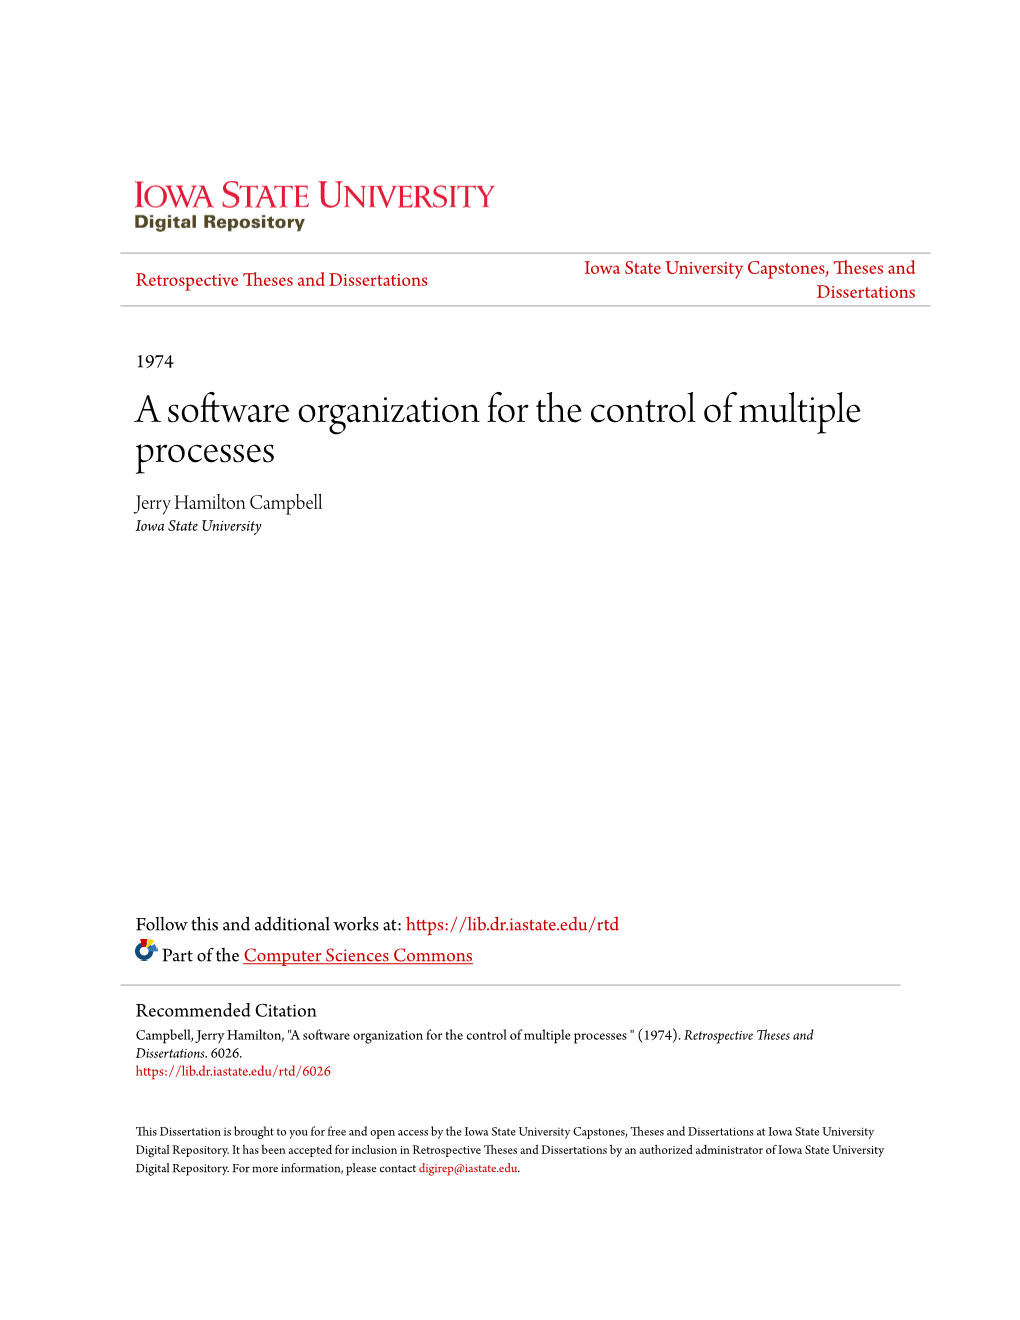 A Software Organization for the Control of Multiple Processes Jerry Hamilton Campbell Iowa State University